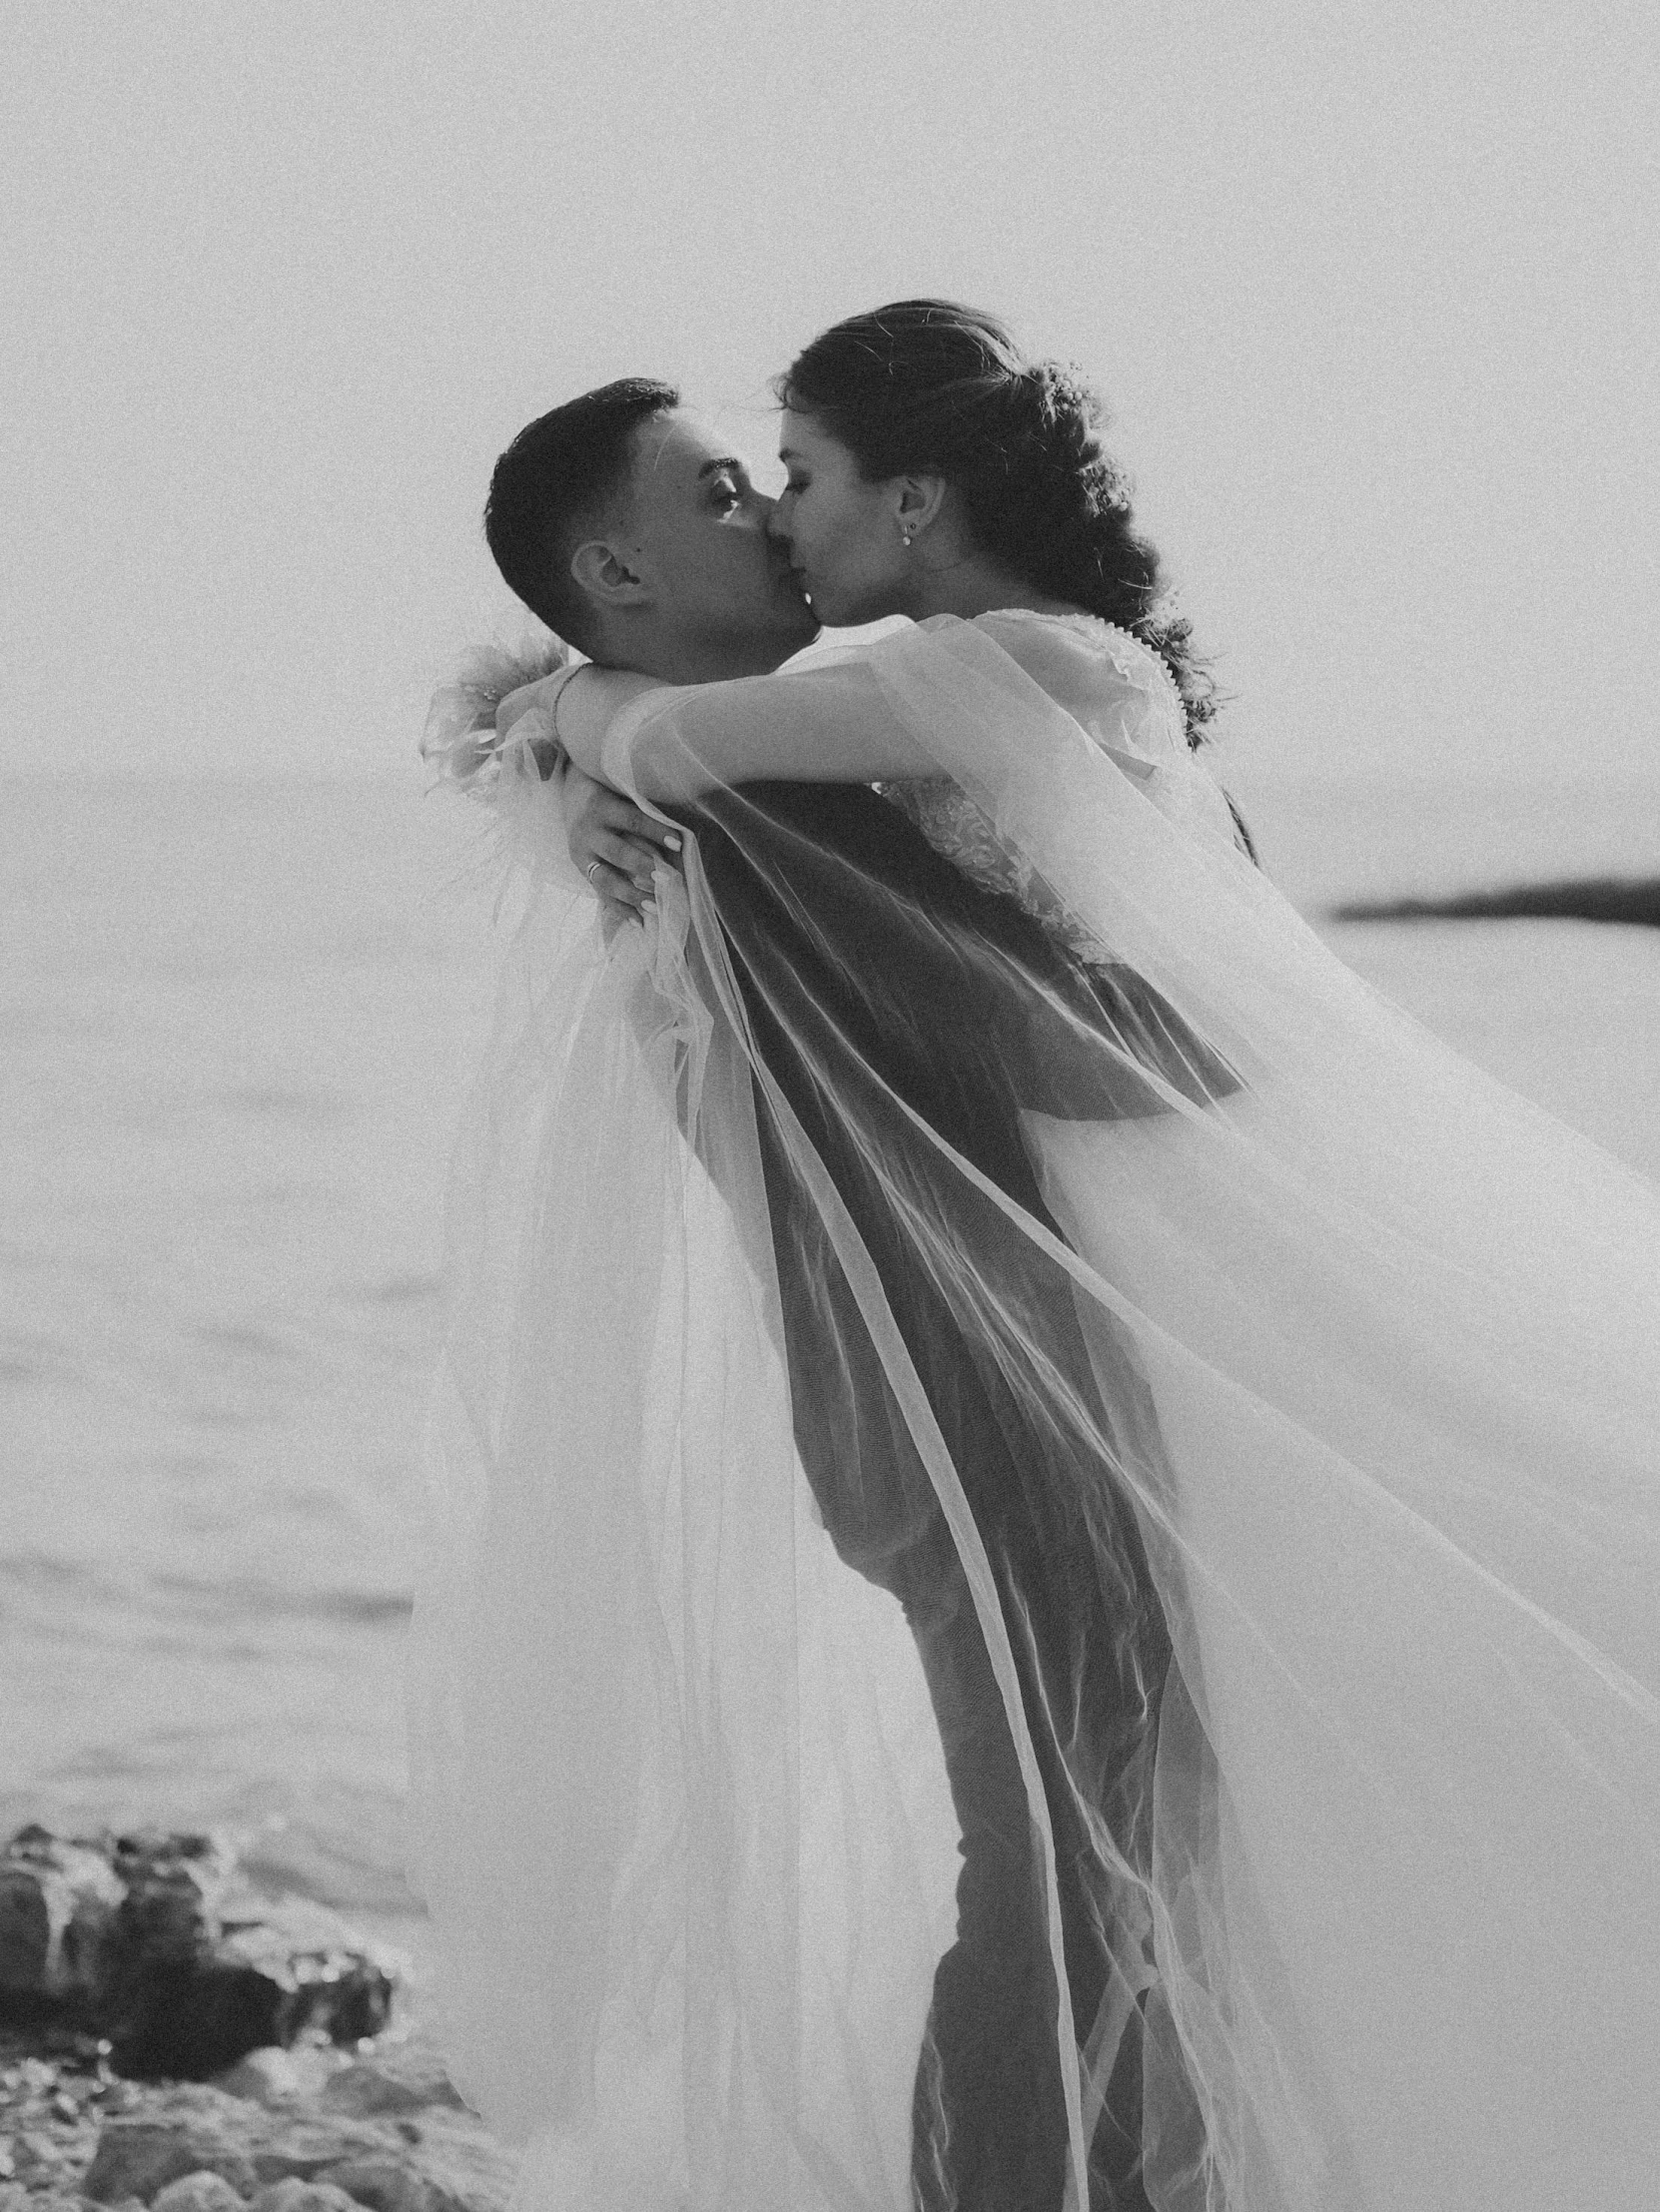 newlywed couple emce on beach in black and white po